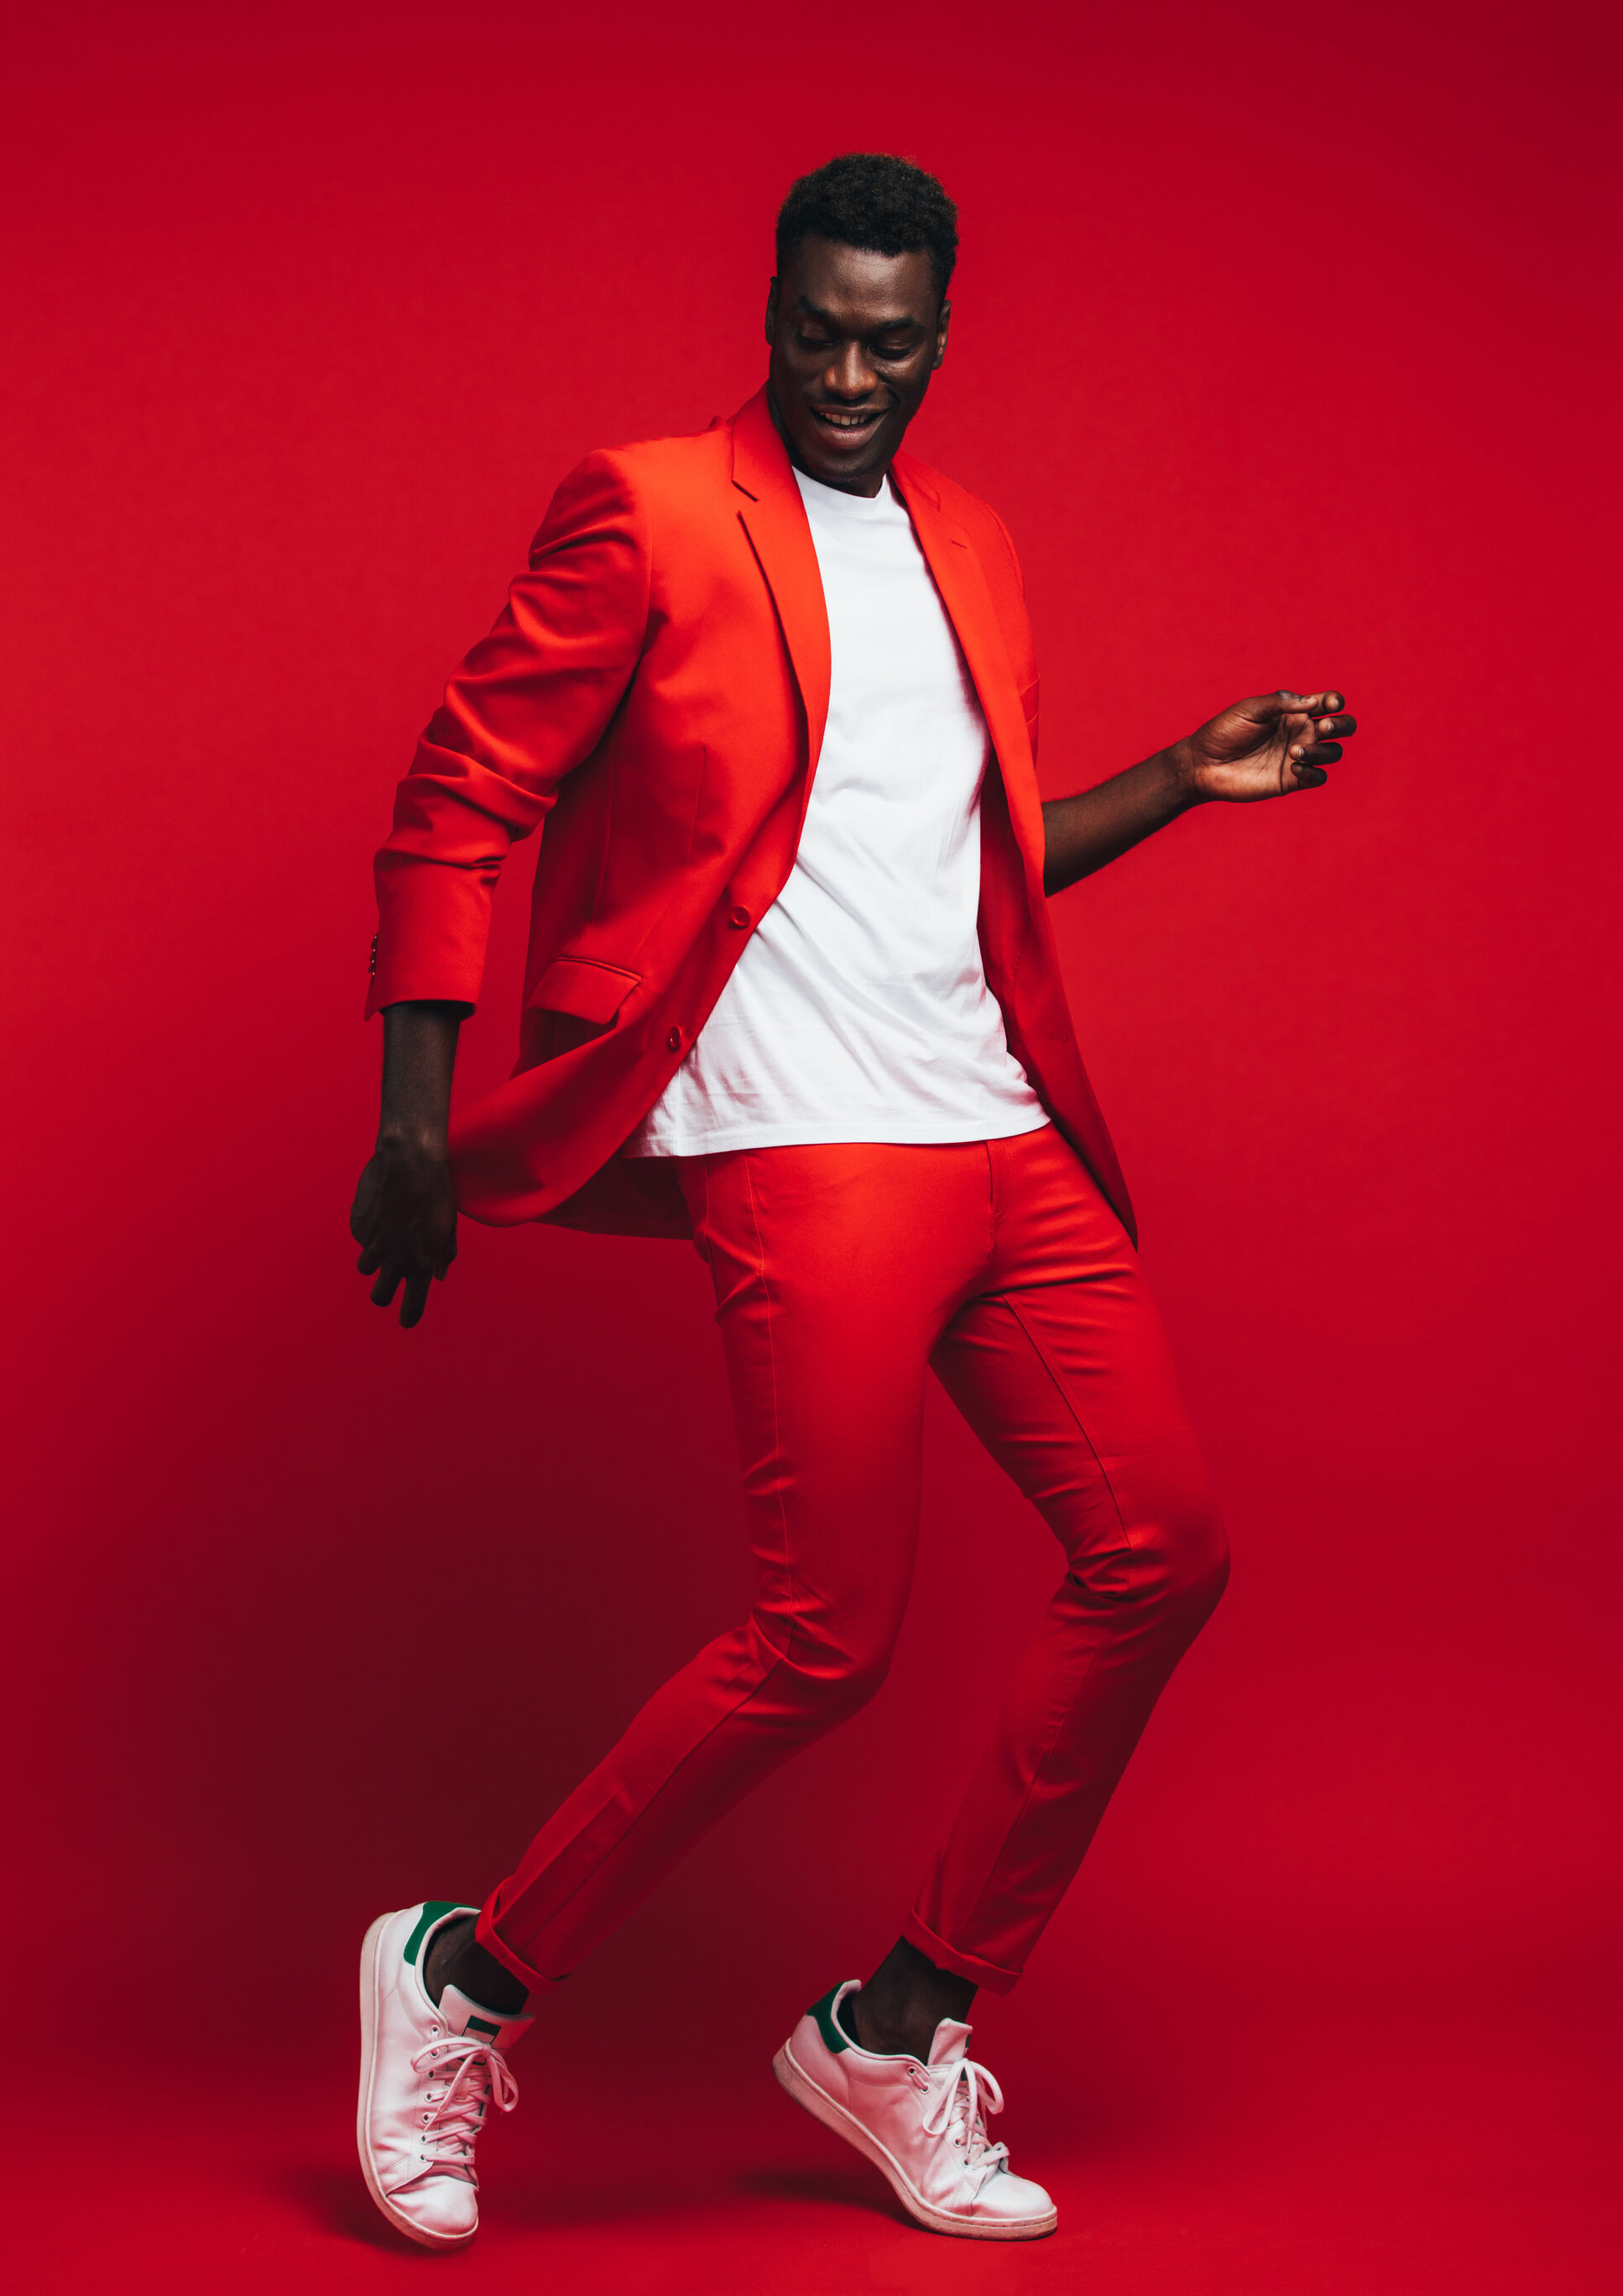  Red Suit, White Shirt, and White Sneakers